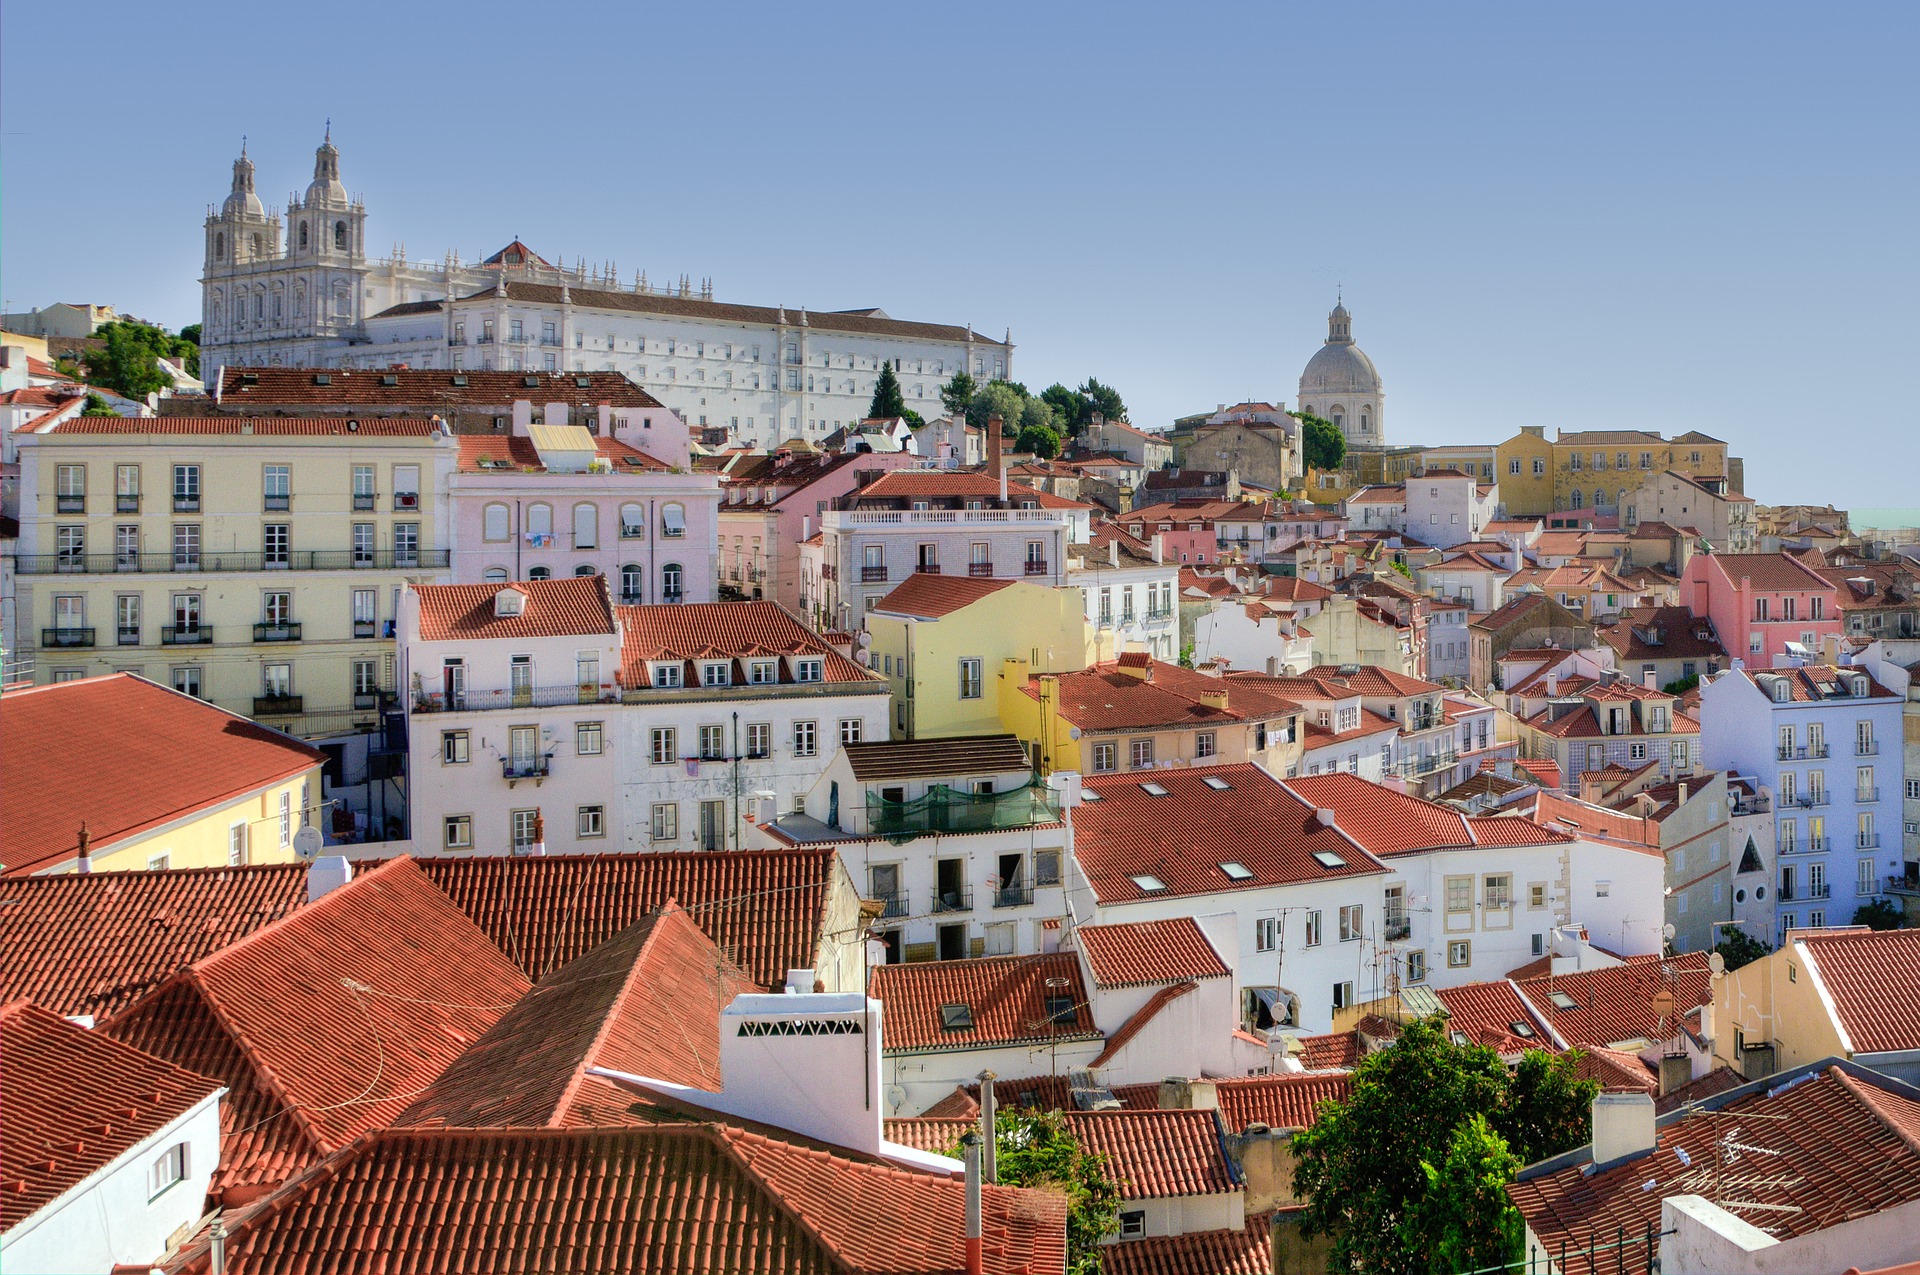 A view over the rooftops of Alfama, Lisbon